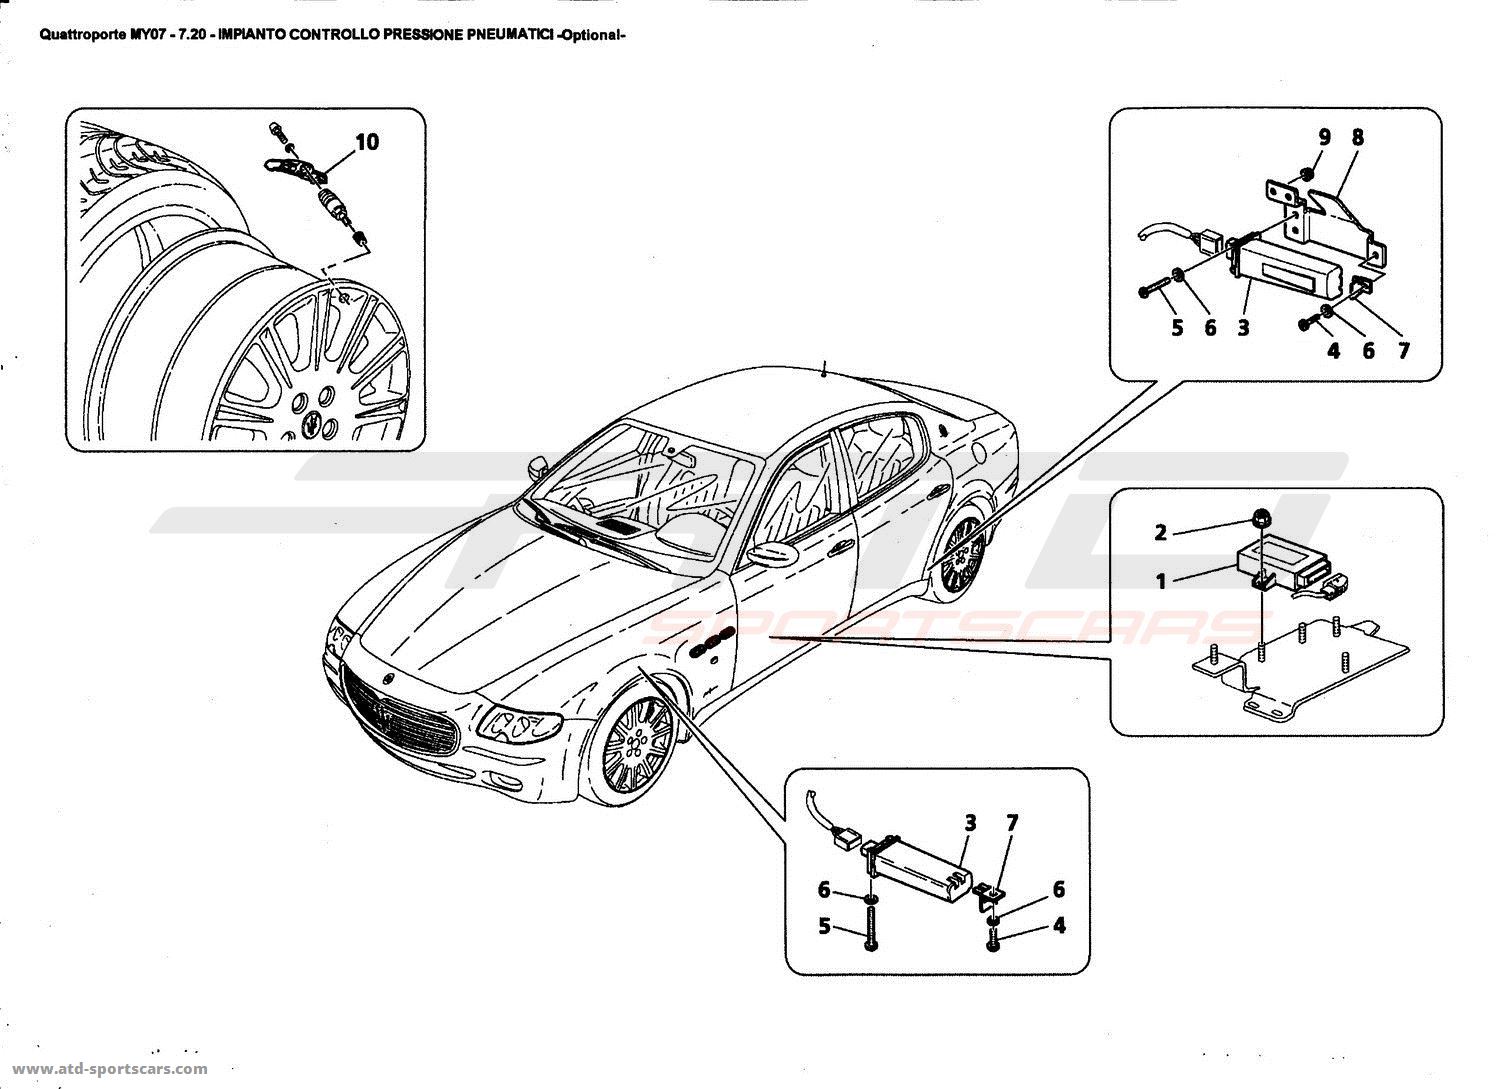 TYRES PRESSURE CONTROL SYSTEM -Optional-